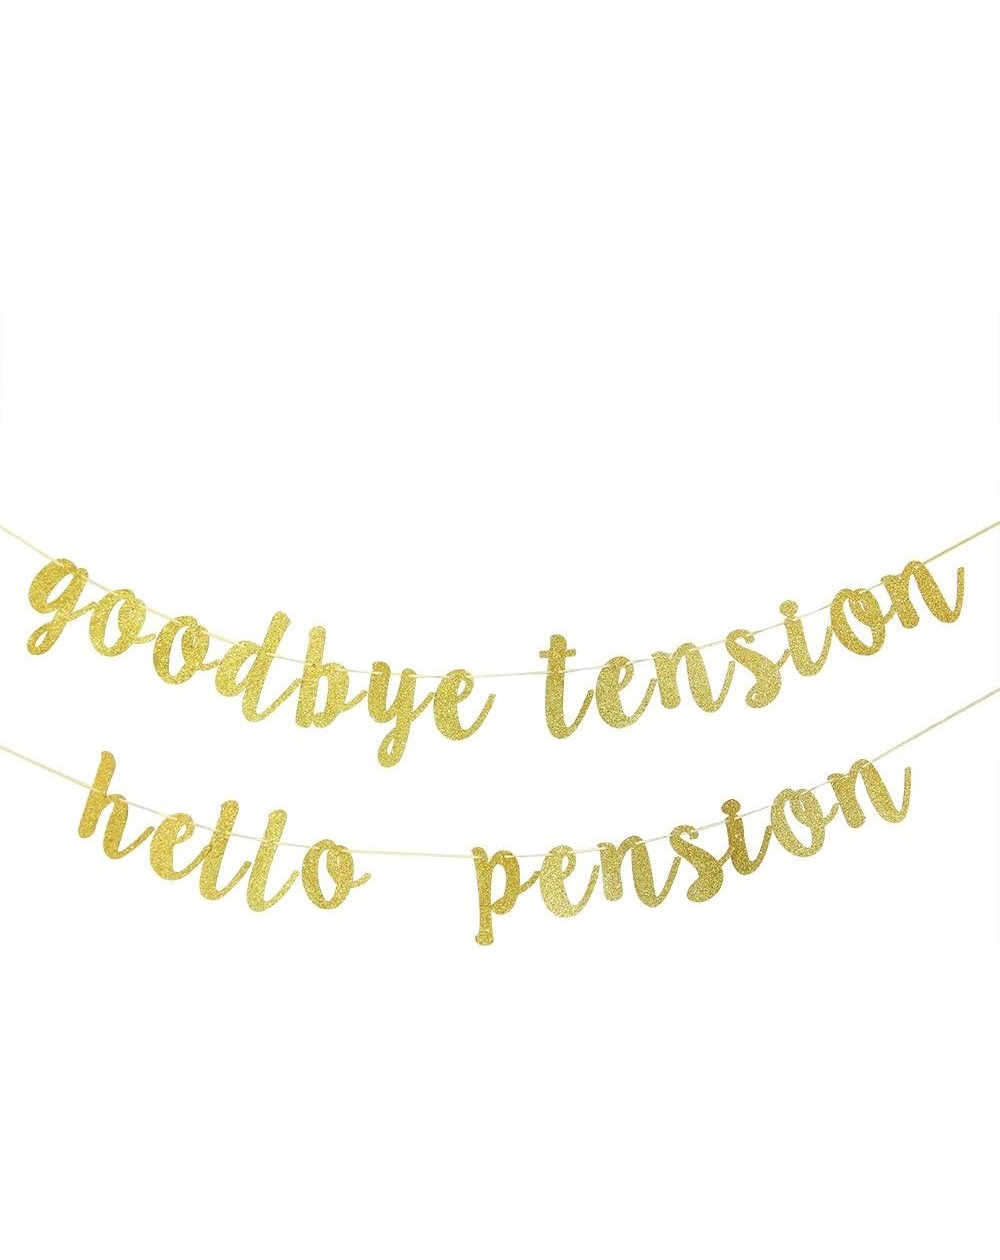 Banners & Garlands Goodbye Tension Hello Pension Banner Gold Glitter Retirement Party Supplies - CH18CK3X5QM $10.68